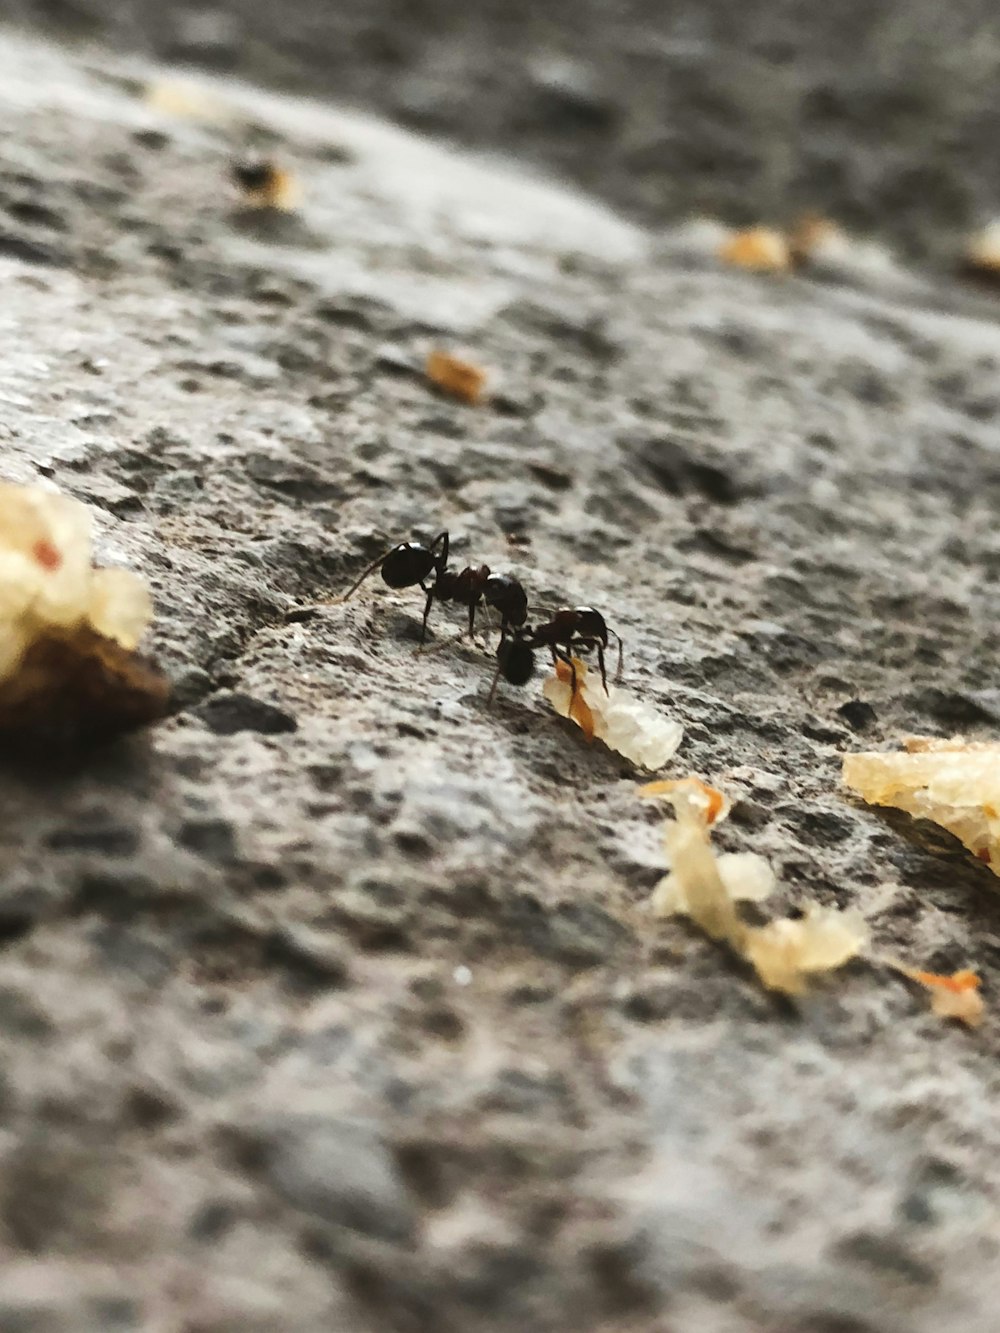 a black ant crawling on a piece of fruit